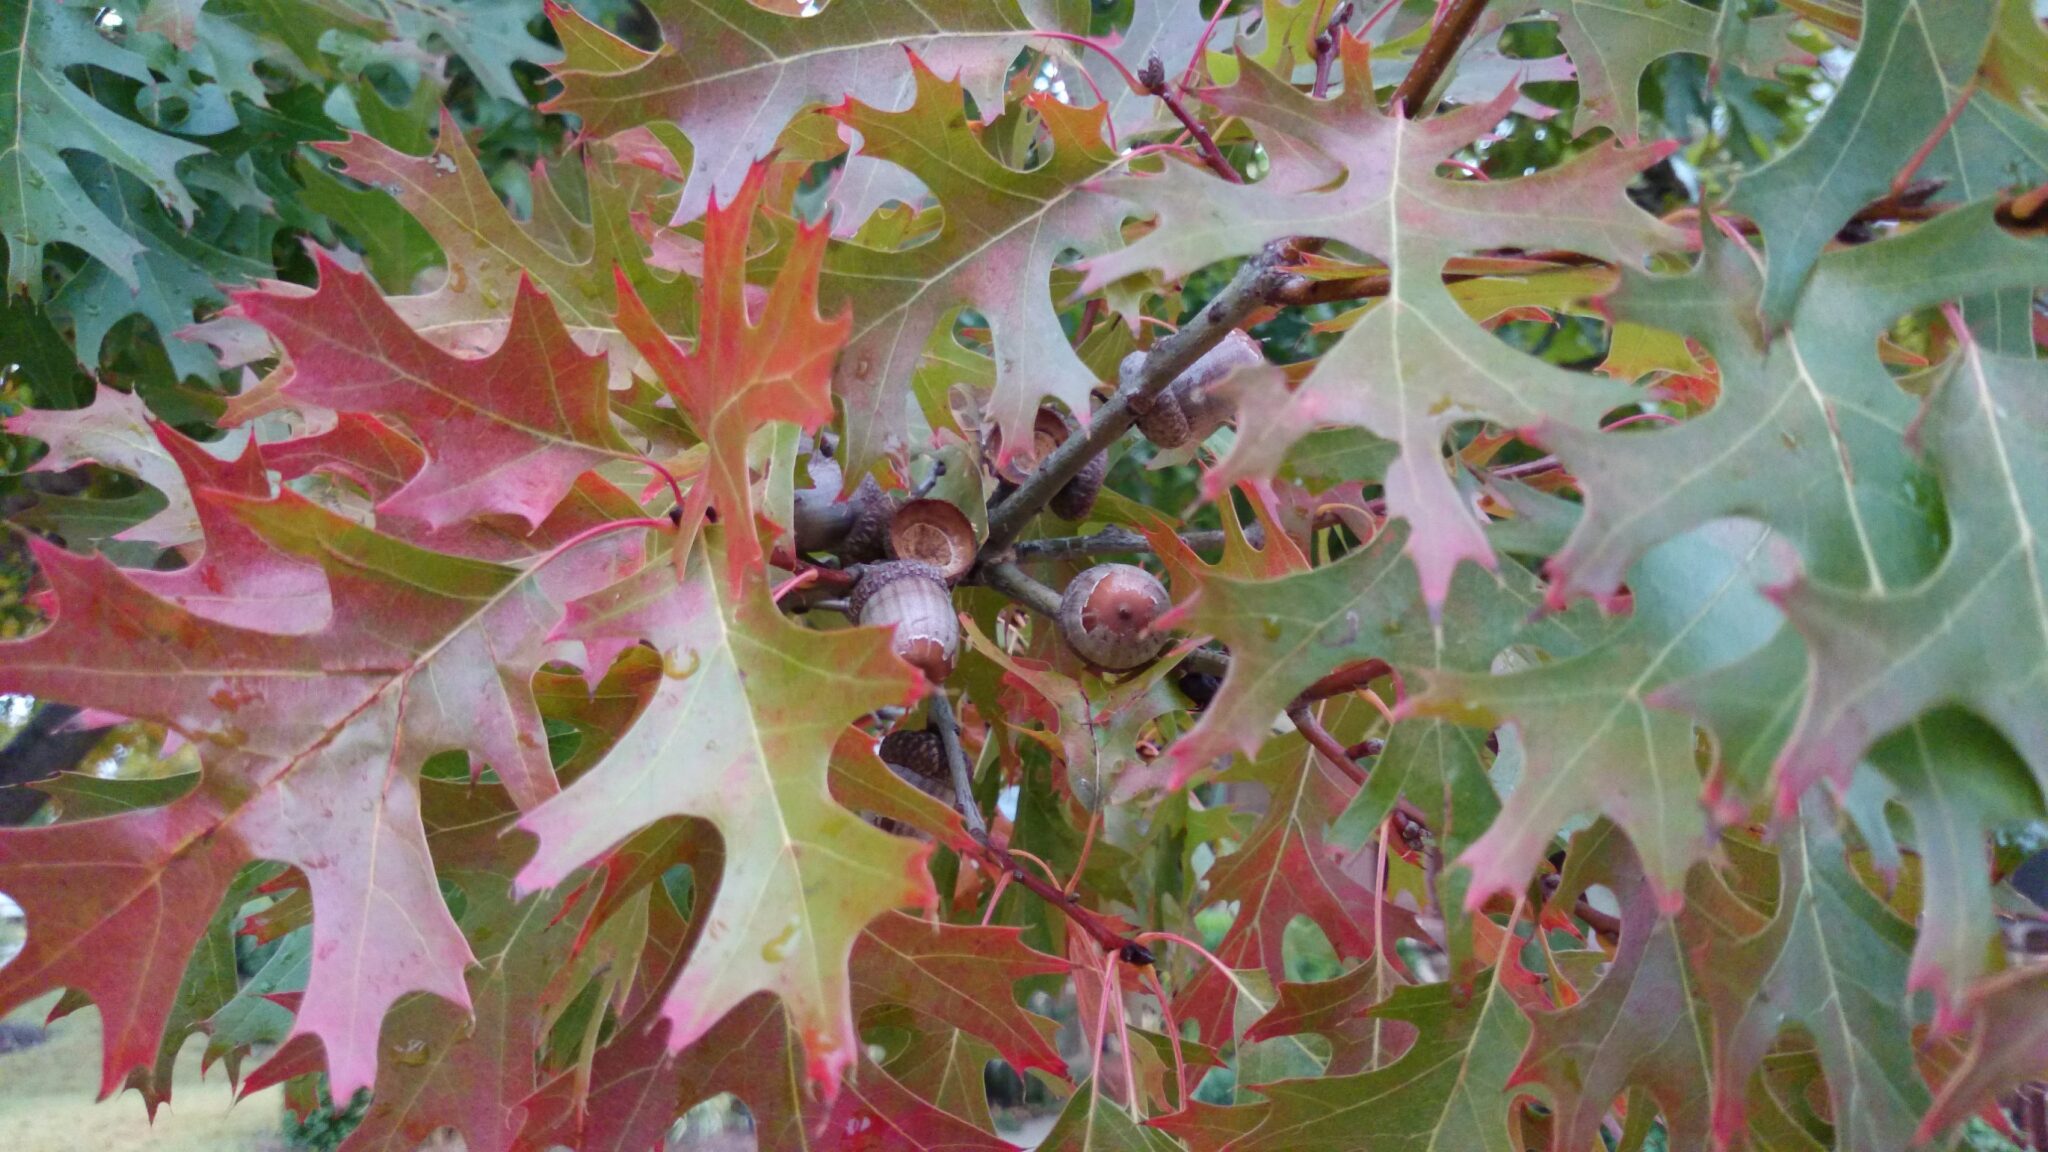 Acorns hidden in oak leaves that are turning colors for the fall.